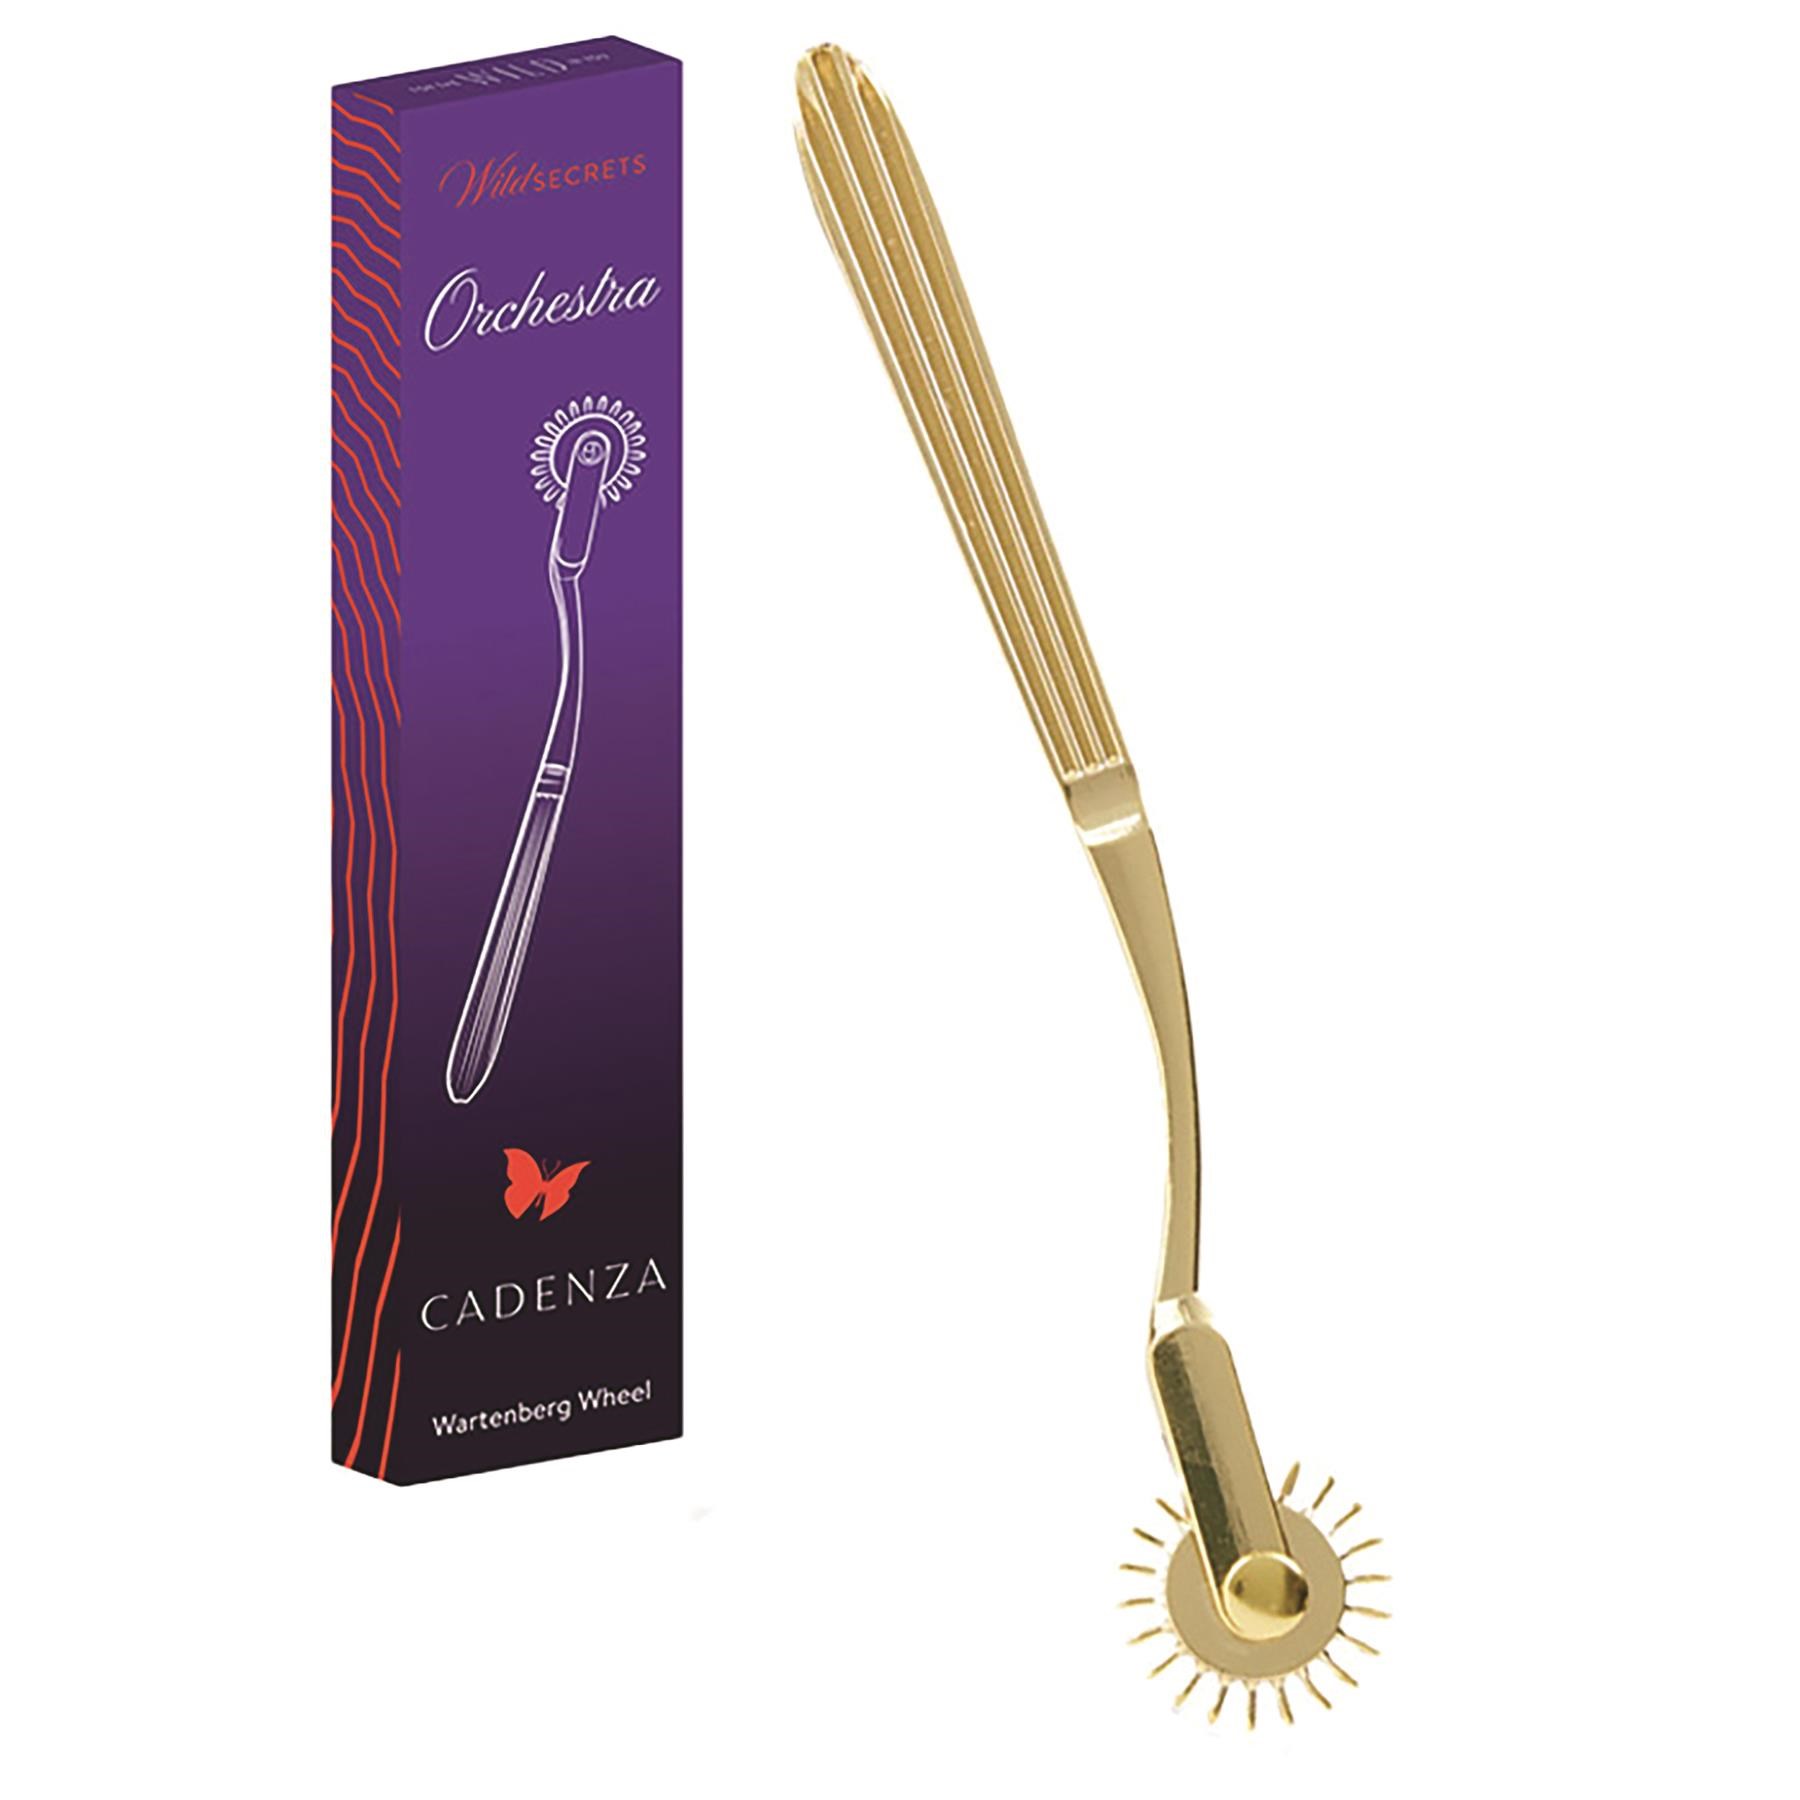 Wild Secrets Orchestra Cadenza Wartenberg Wheel - Product and Packaging Shot